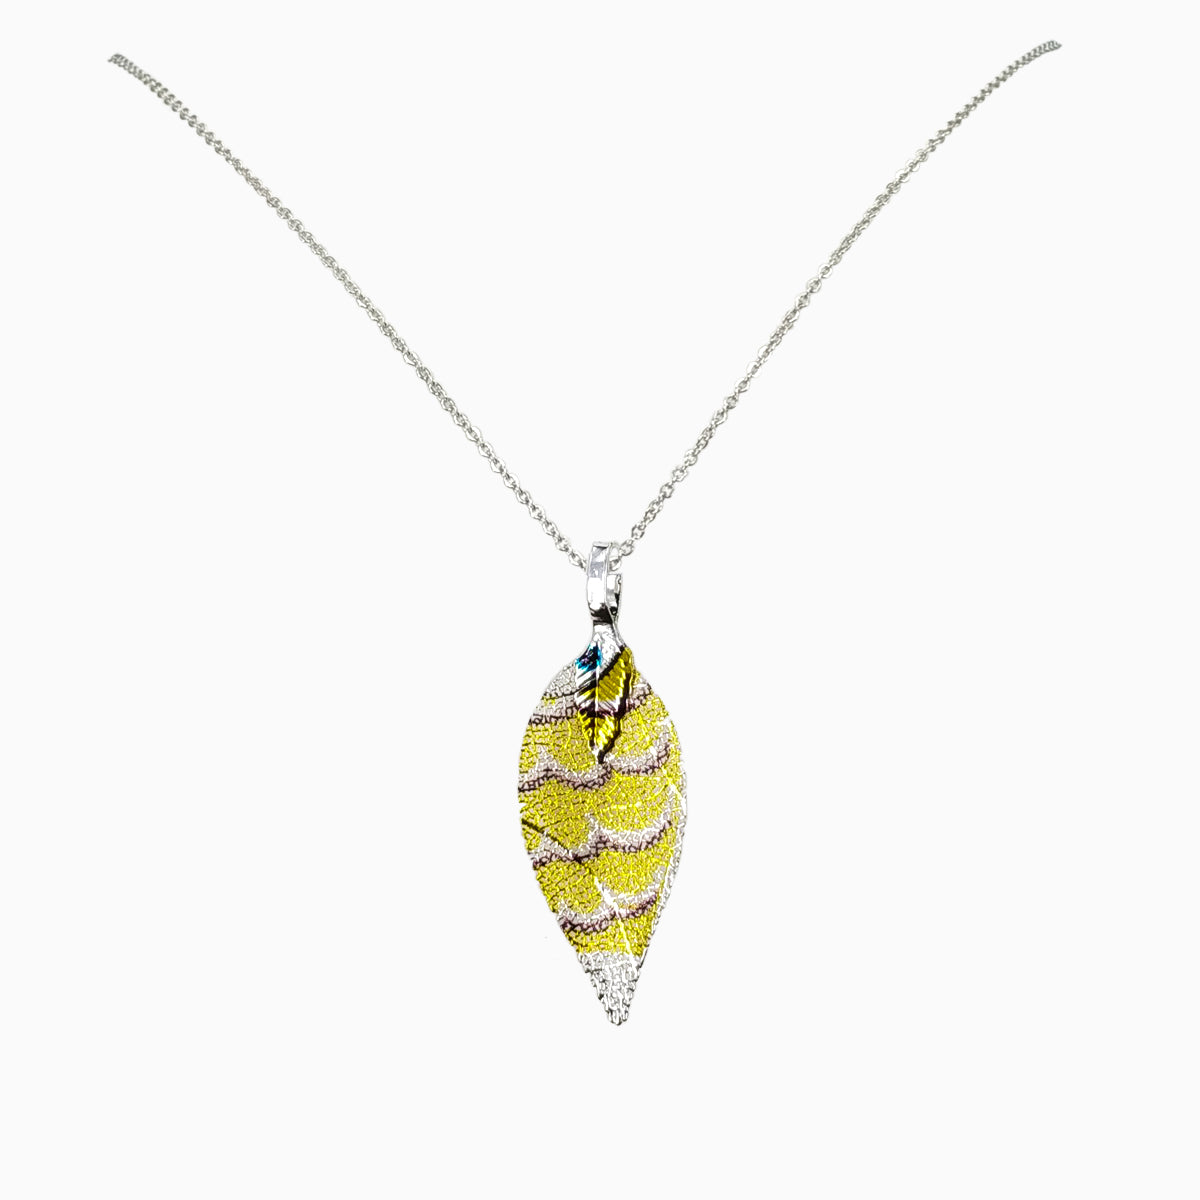 Fish - Real Leaf Pendant Necklace